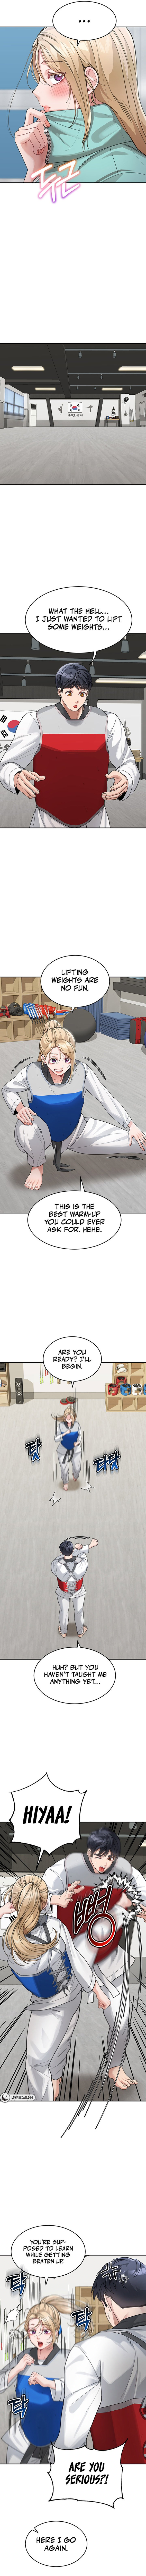 is-it-your-mother-or-sister-chap-30-5